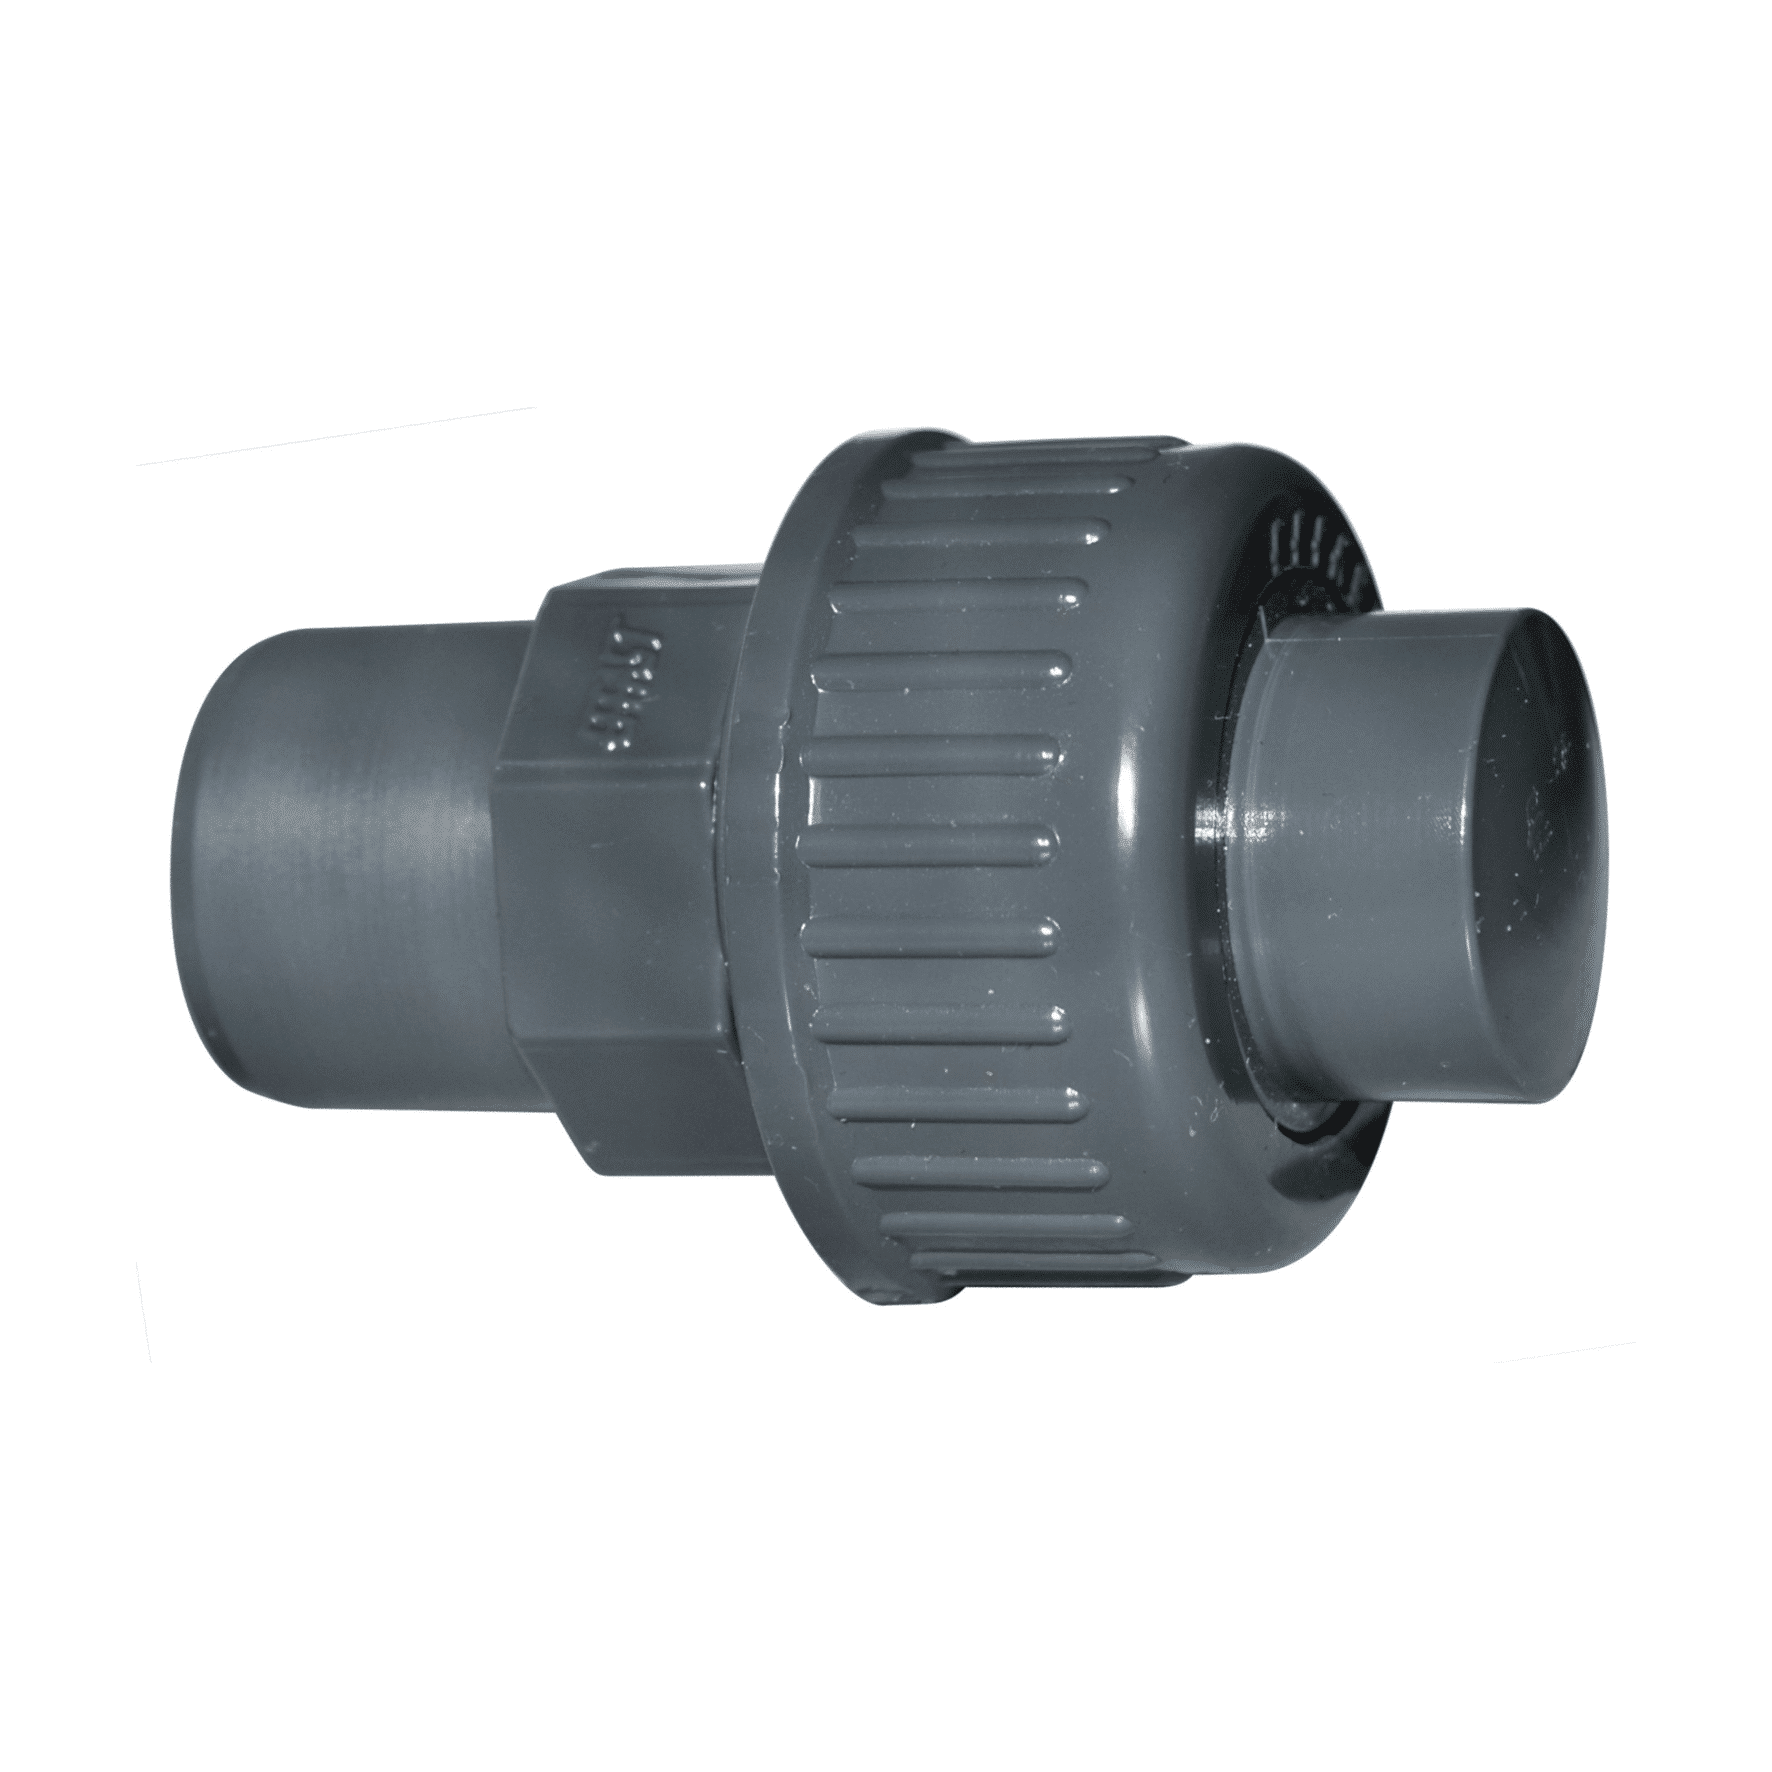 PVC-U union adaptor with end cap - EFFAST - 100% Made in Italy